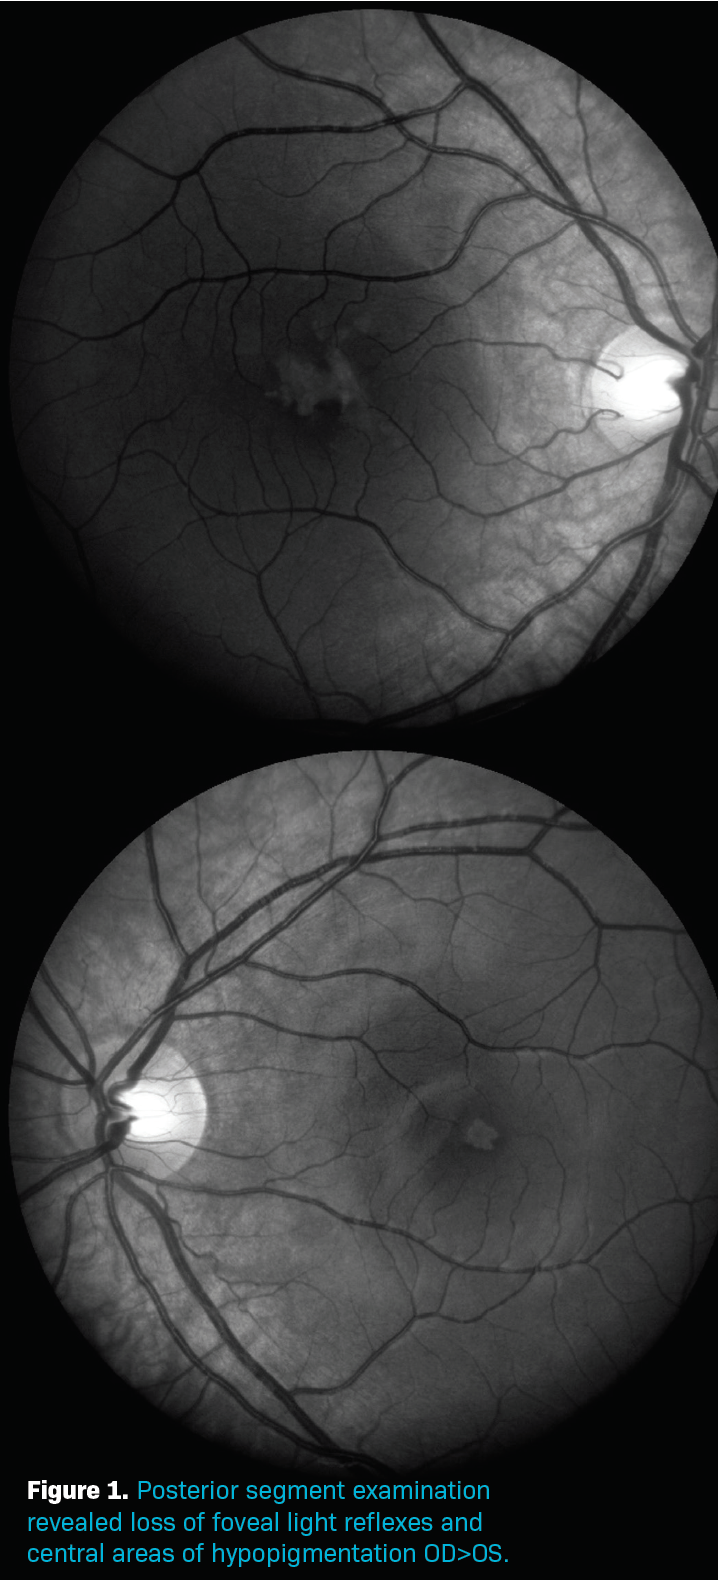 CASE REPORT: Self-induced maculopathy by 12-year-old boy